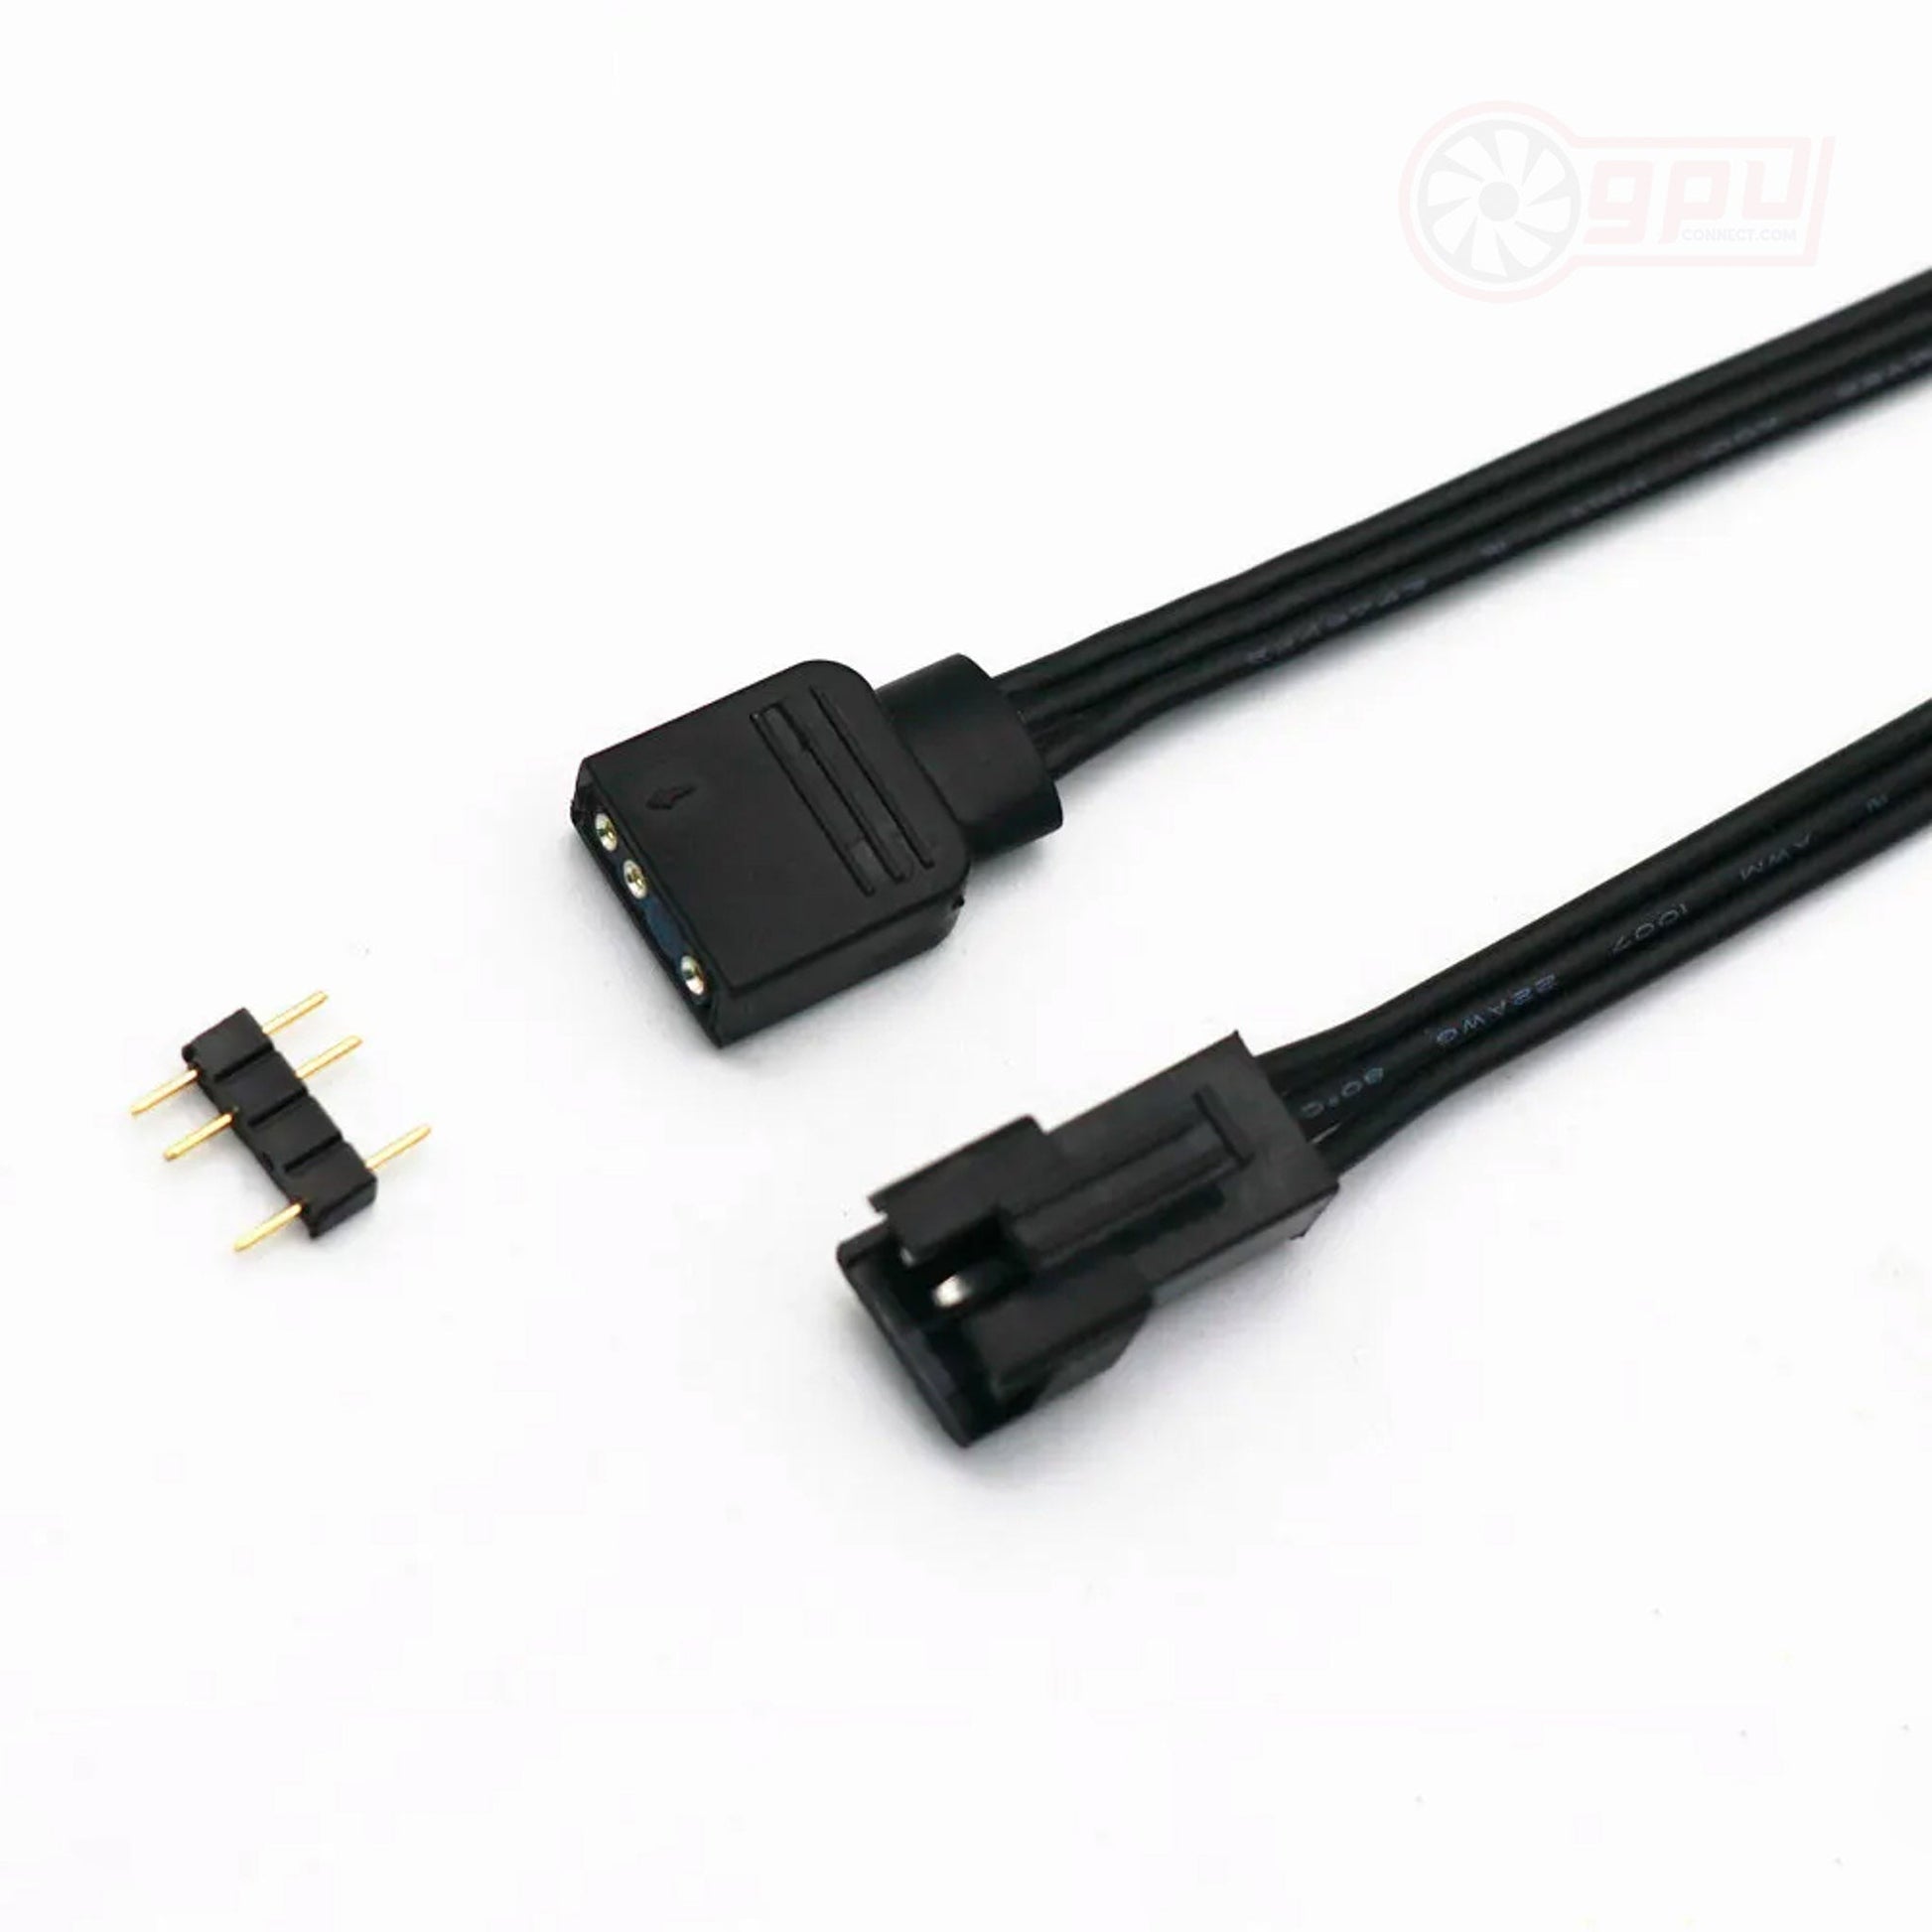 GPUCONNECT 3-Pin 5V / 4-Pin 12V RGB ARGB Control Extension Adapter Cable - GPUCONNECT.COM